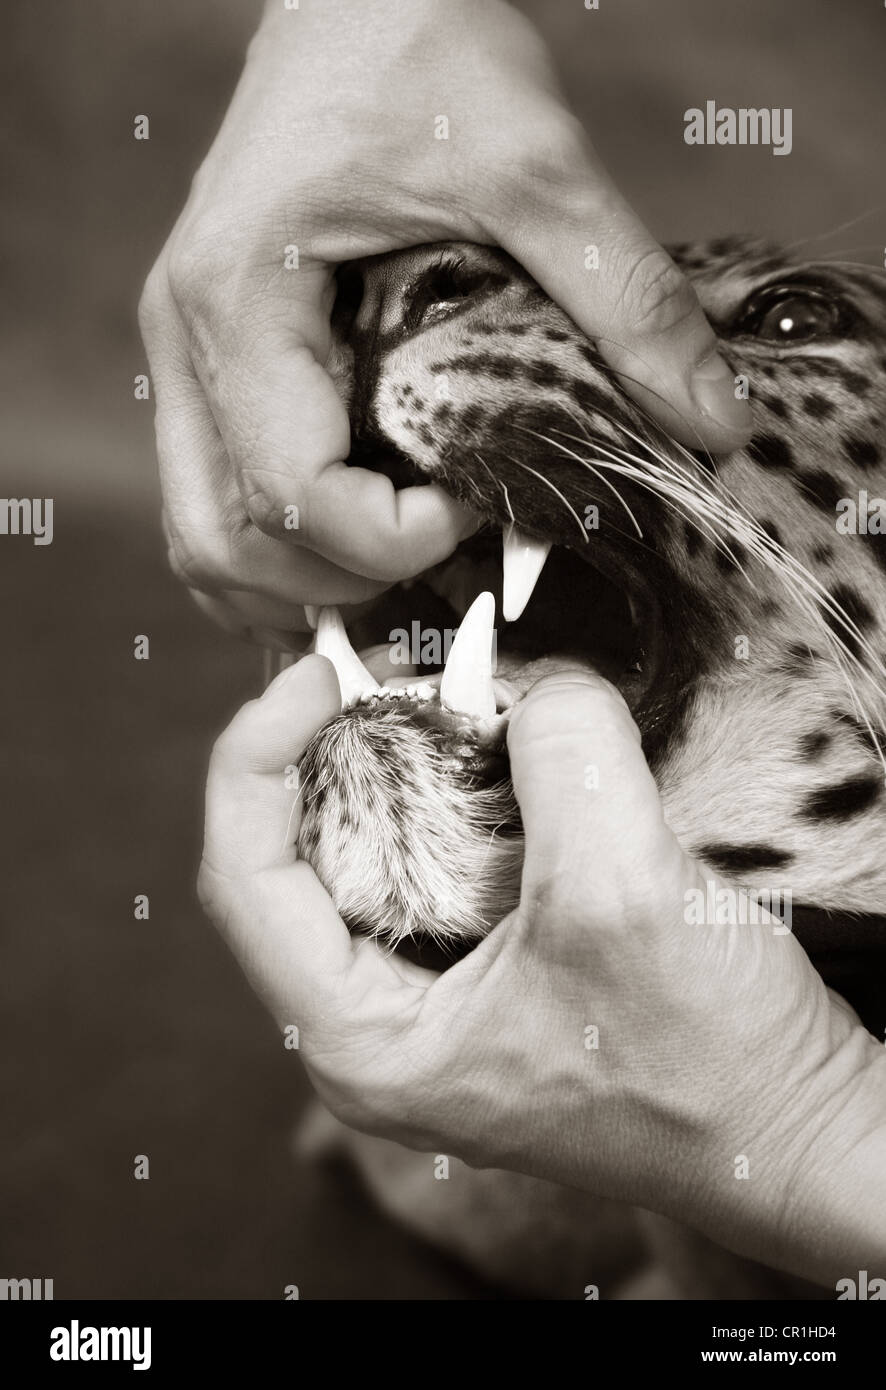 Furious leopard and man's hand close-up Stock Photo